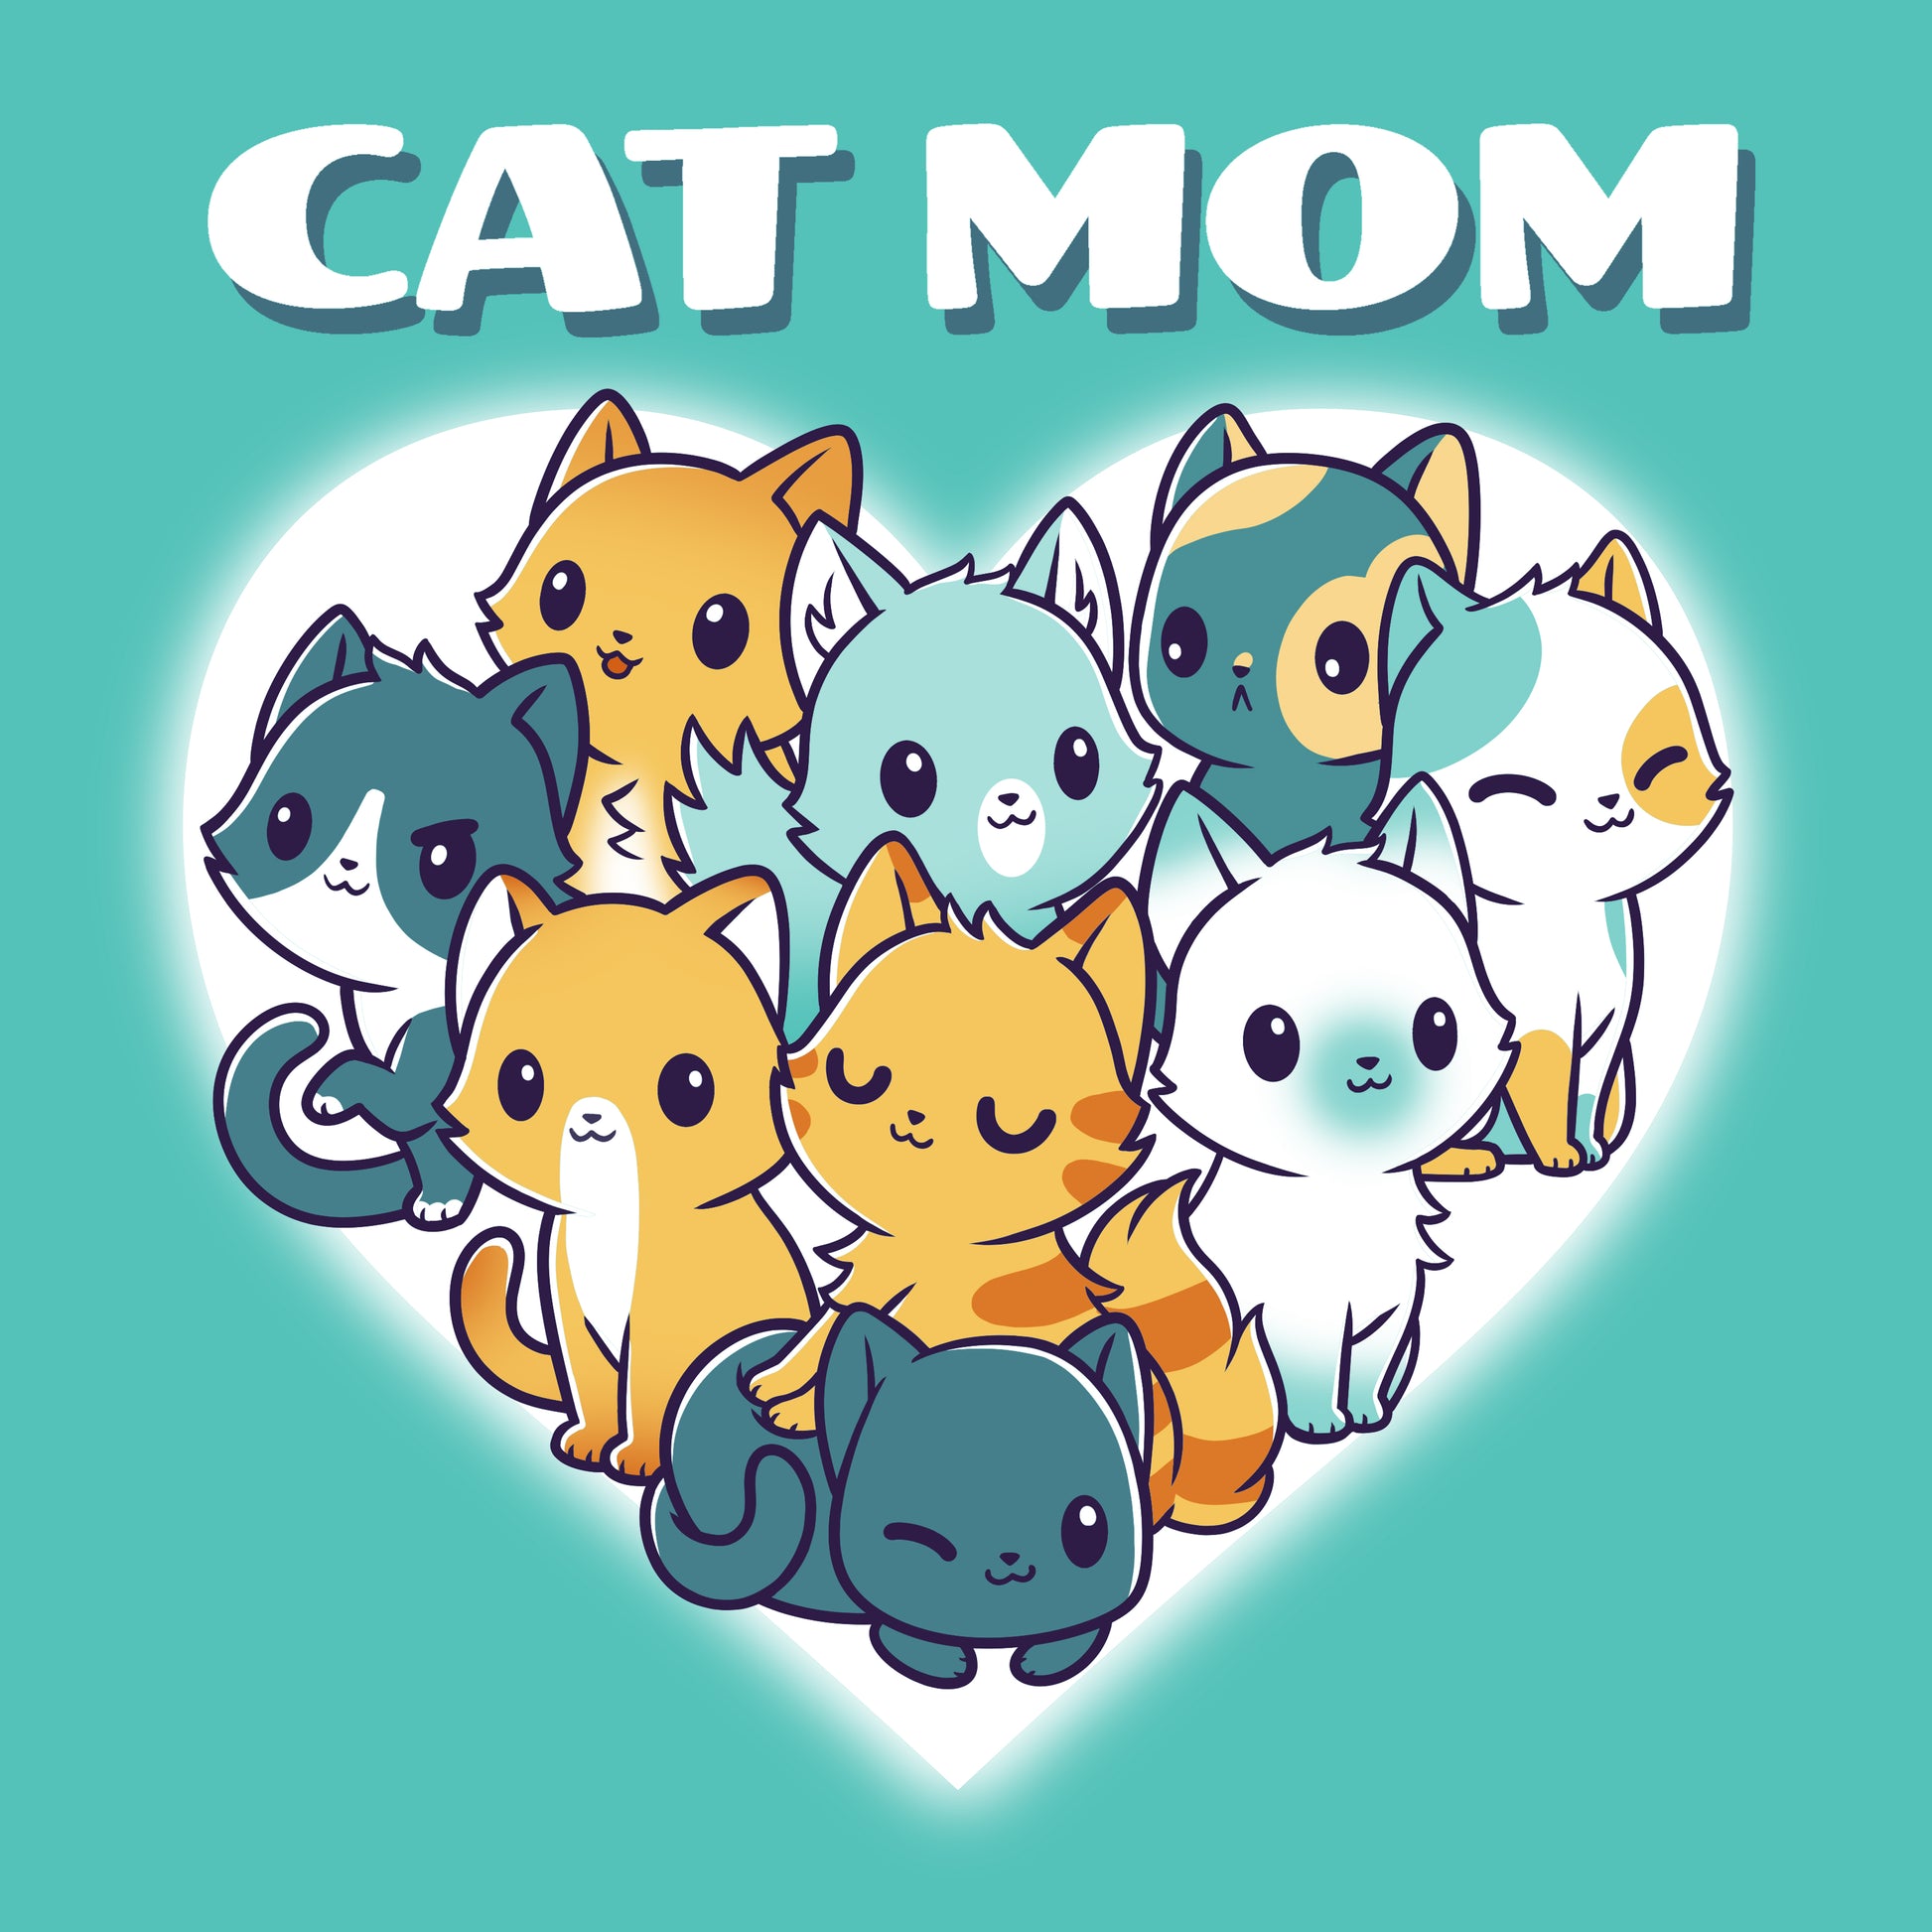 A group of cats in a heart shape with the words "I'm a Cat Mom" and Caribbean Blue TeeTurtle t-shirt.